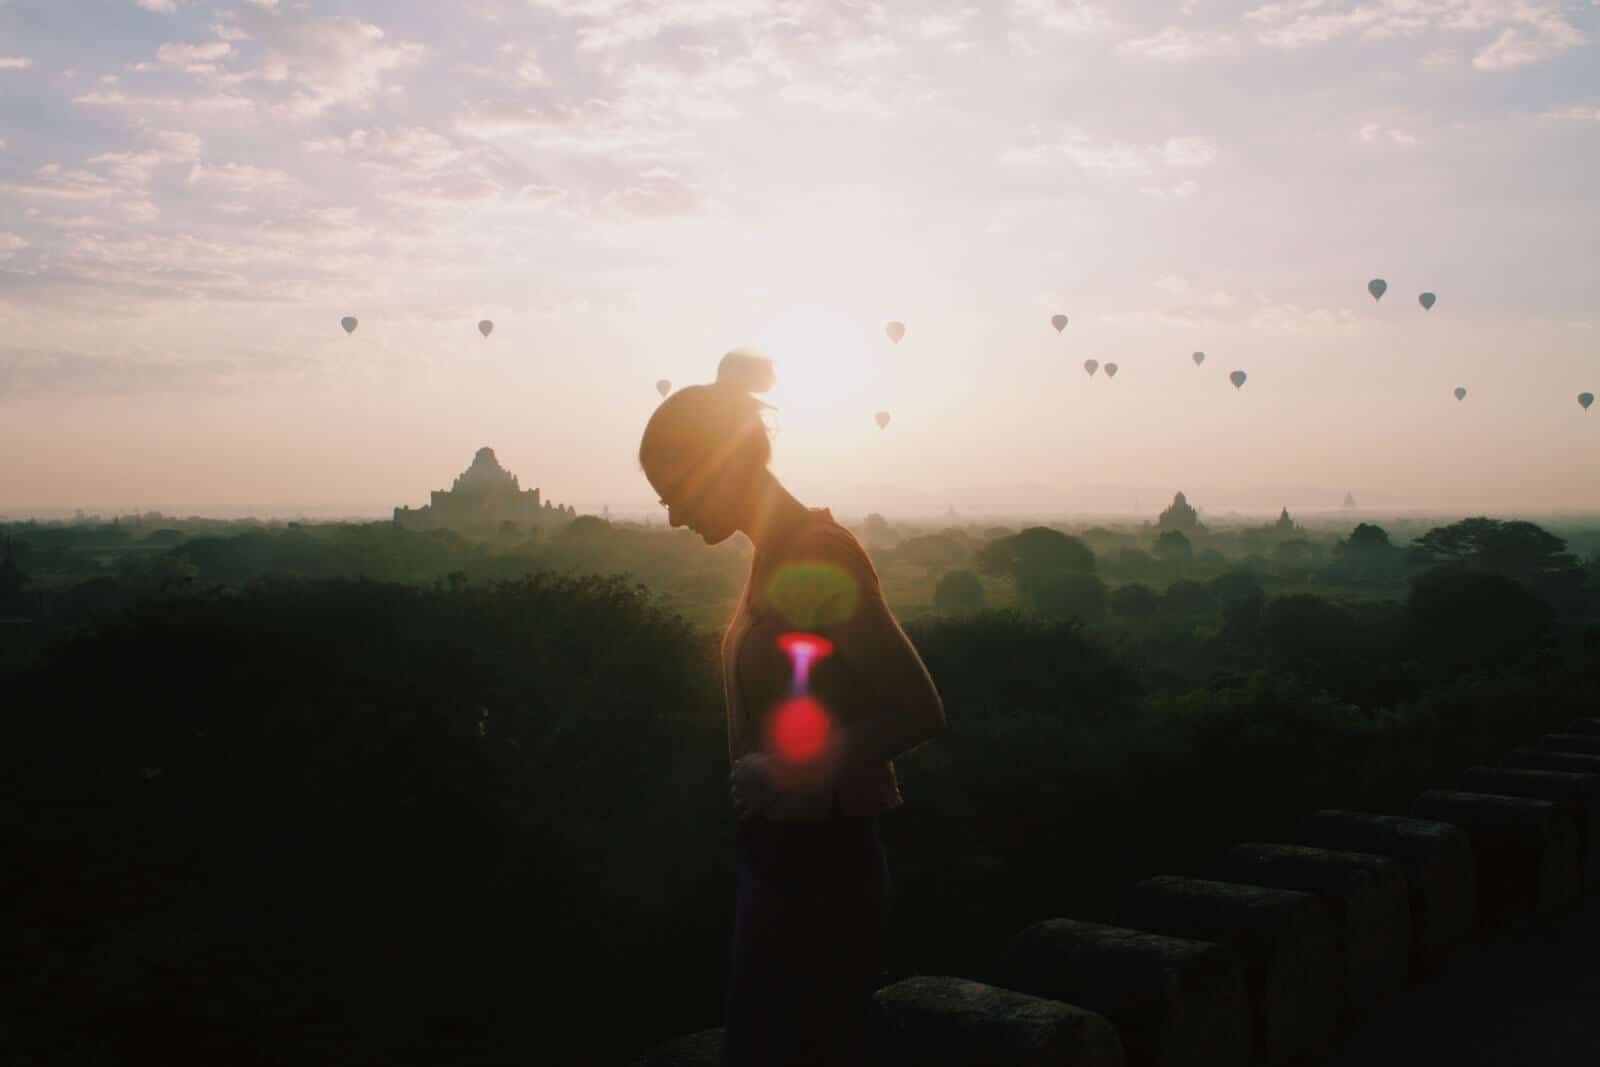 Bagan at sunrise with a woman and hot air balloons silhouette.